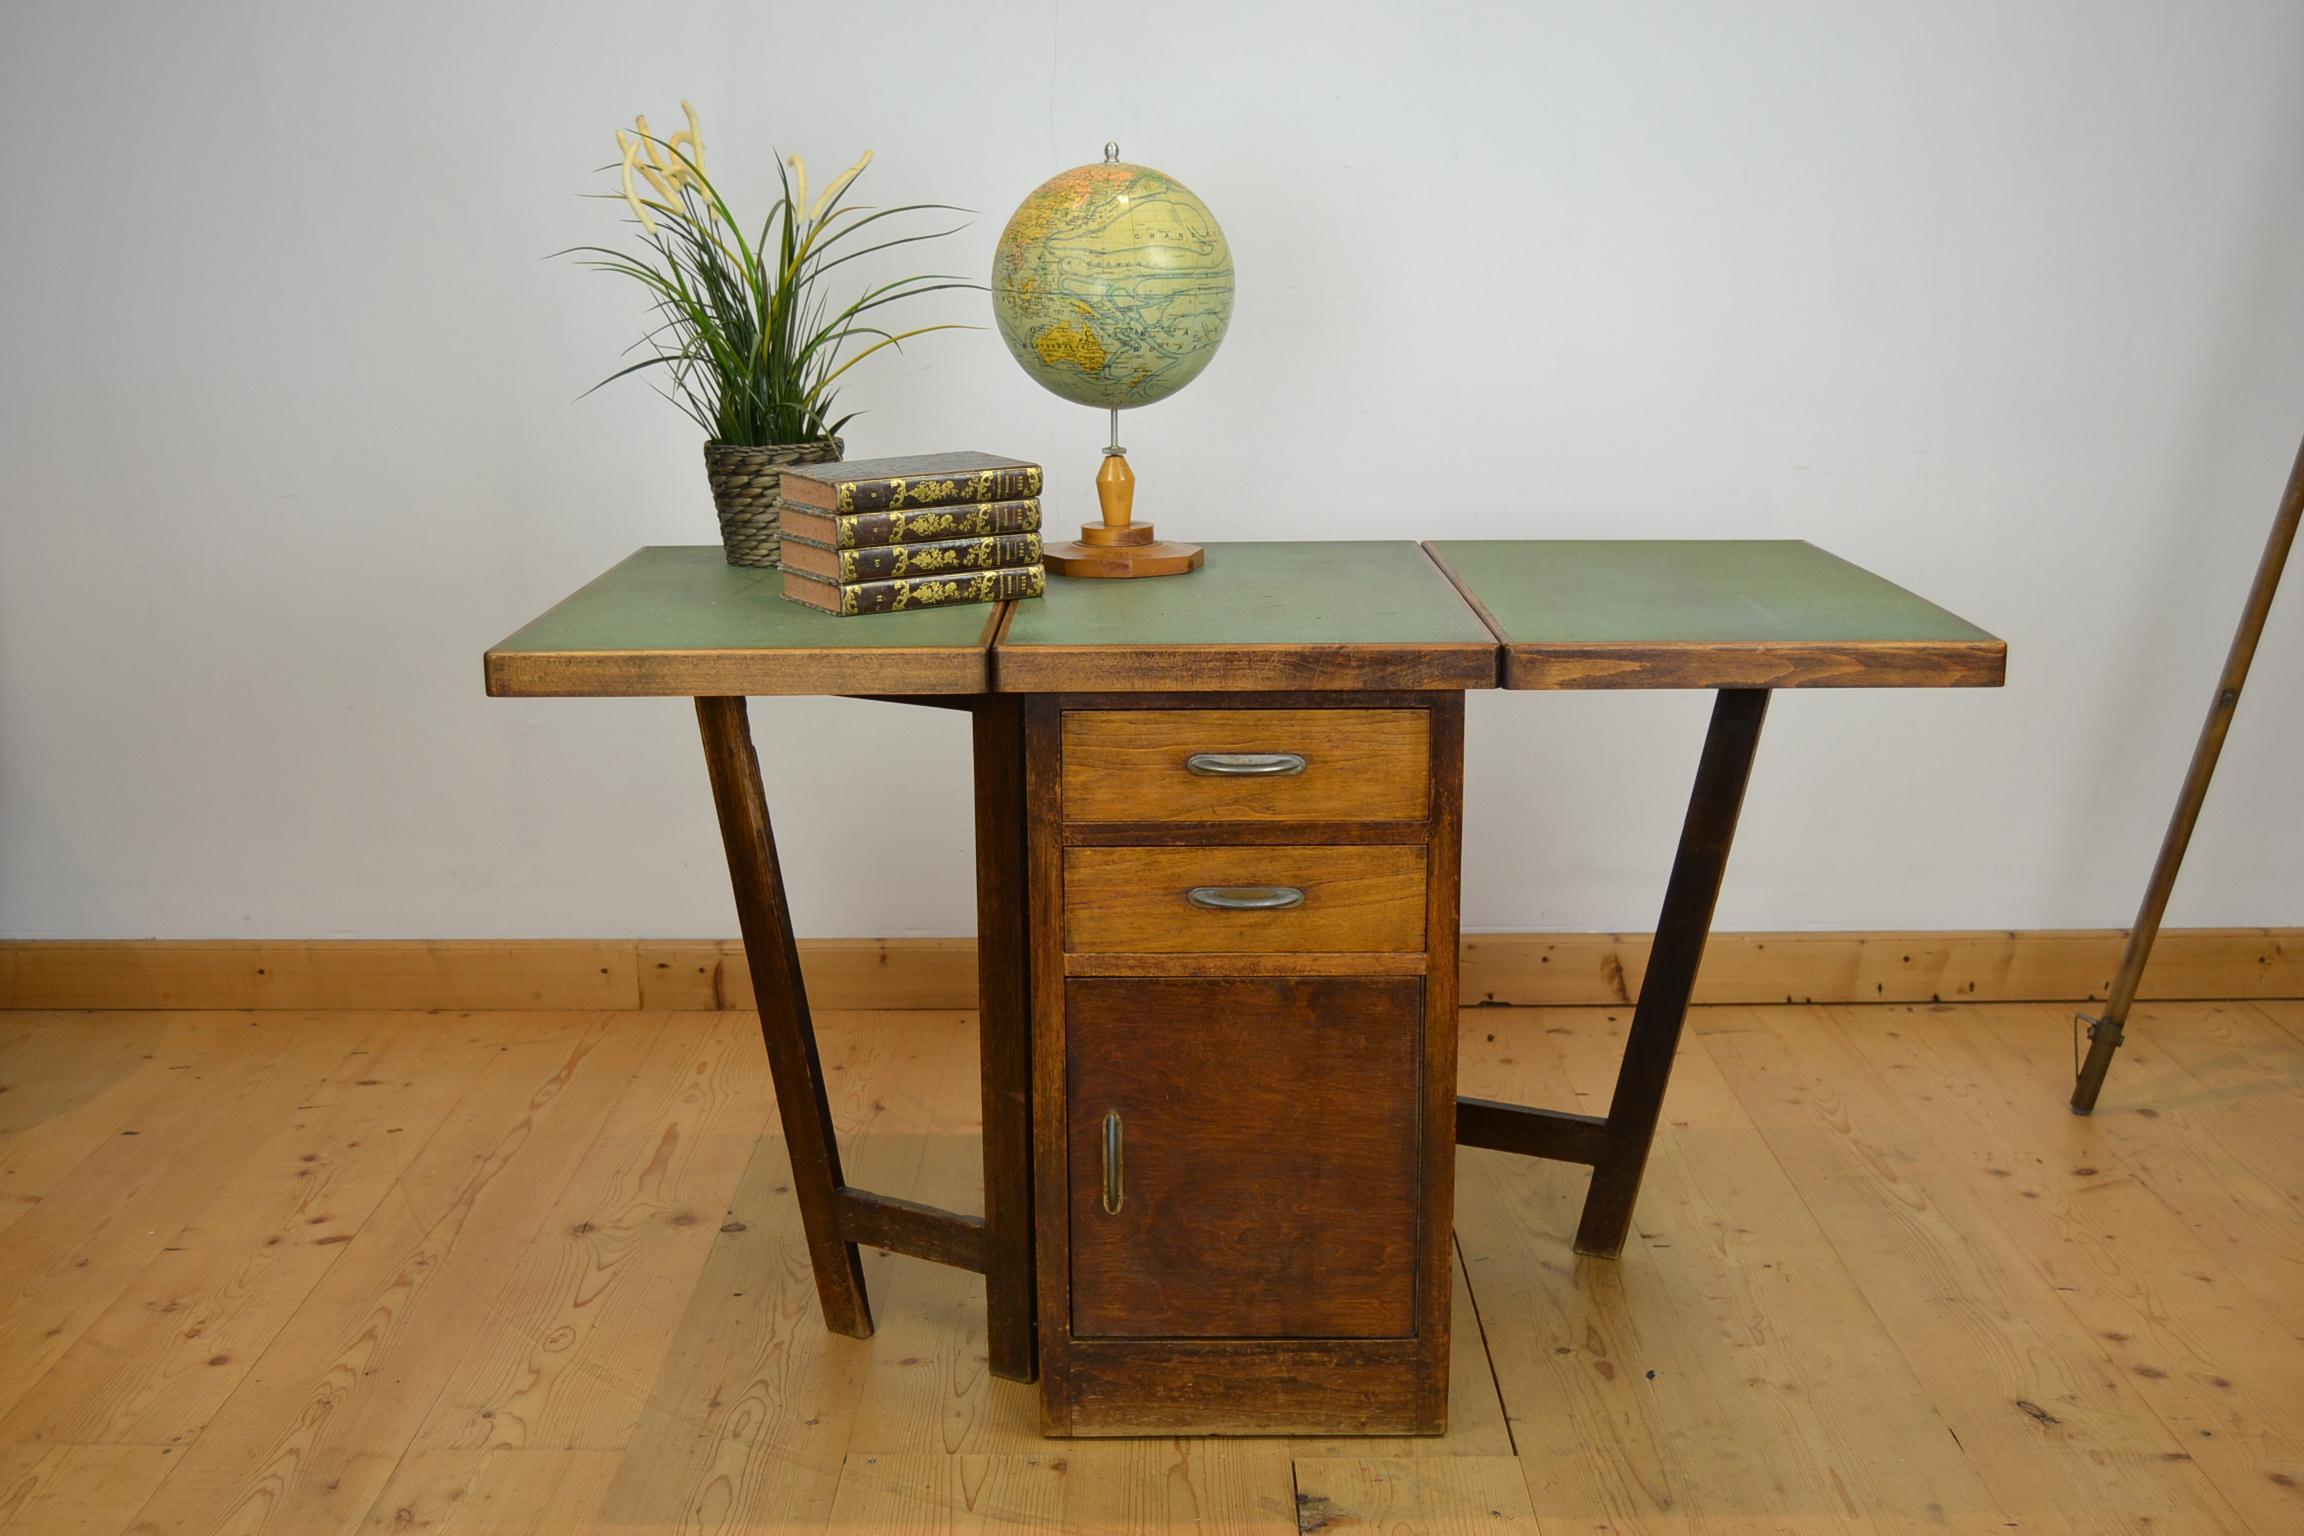 Great looking industrial drop leaf table. 
This wooden table has 2 drop leafs and storage space under on both sides: 
on 1 side 2 drawers and a door, on the other side a door. 
The top of the table is made of green speckled linoleum -